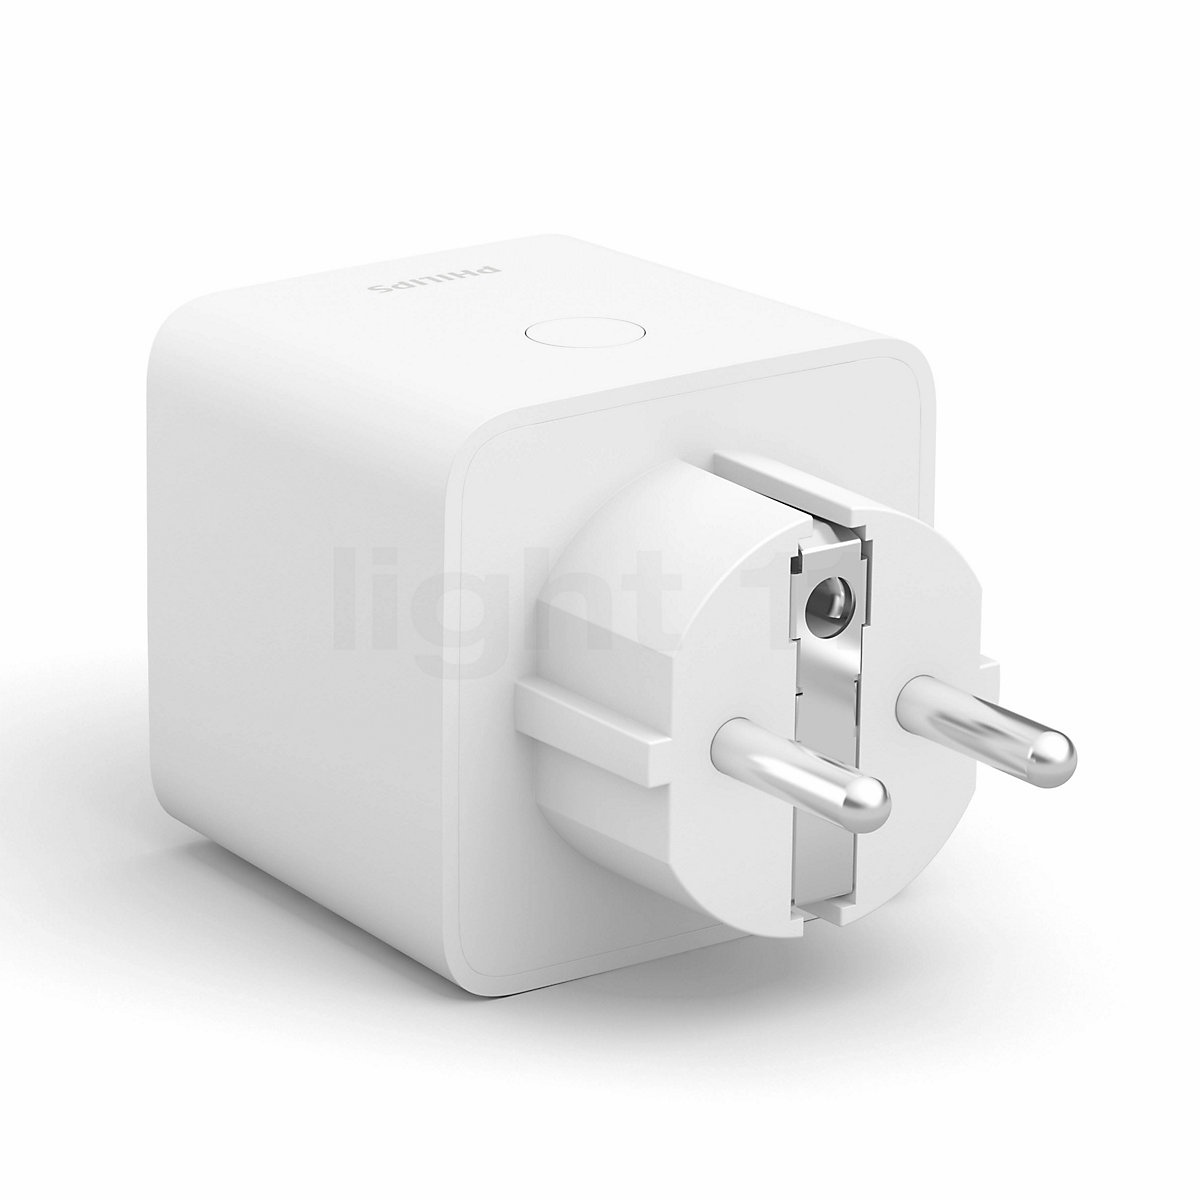 https://l11.scene7.com/is/image/L11/wh1200st/Philips_Hue_SmartPlug_power_outlet_white--a5f7f6d4220fa59aef038776976d8726.jpg